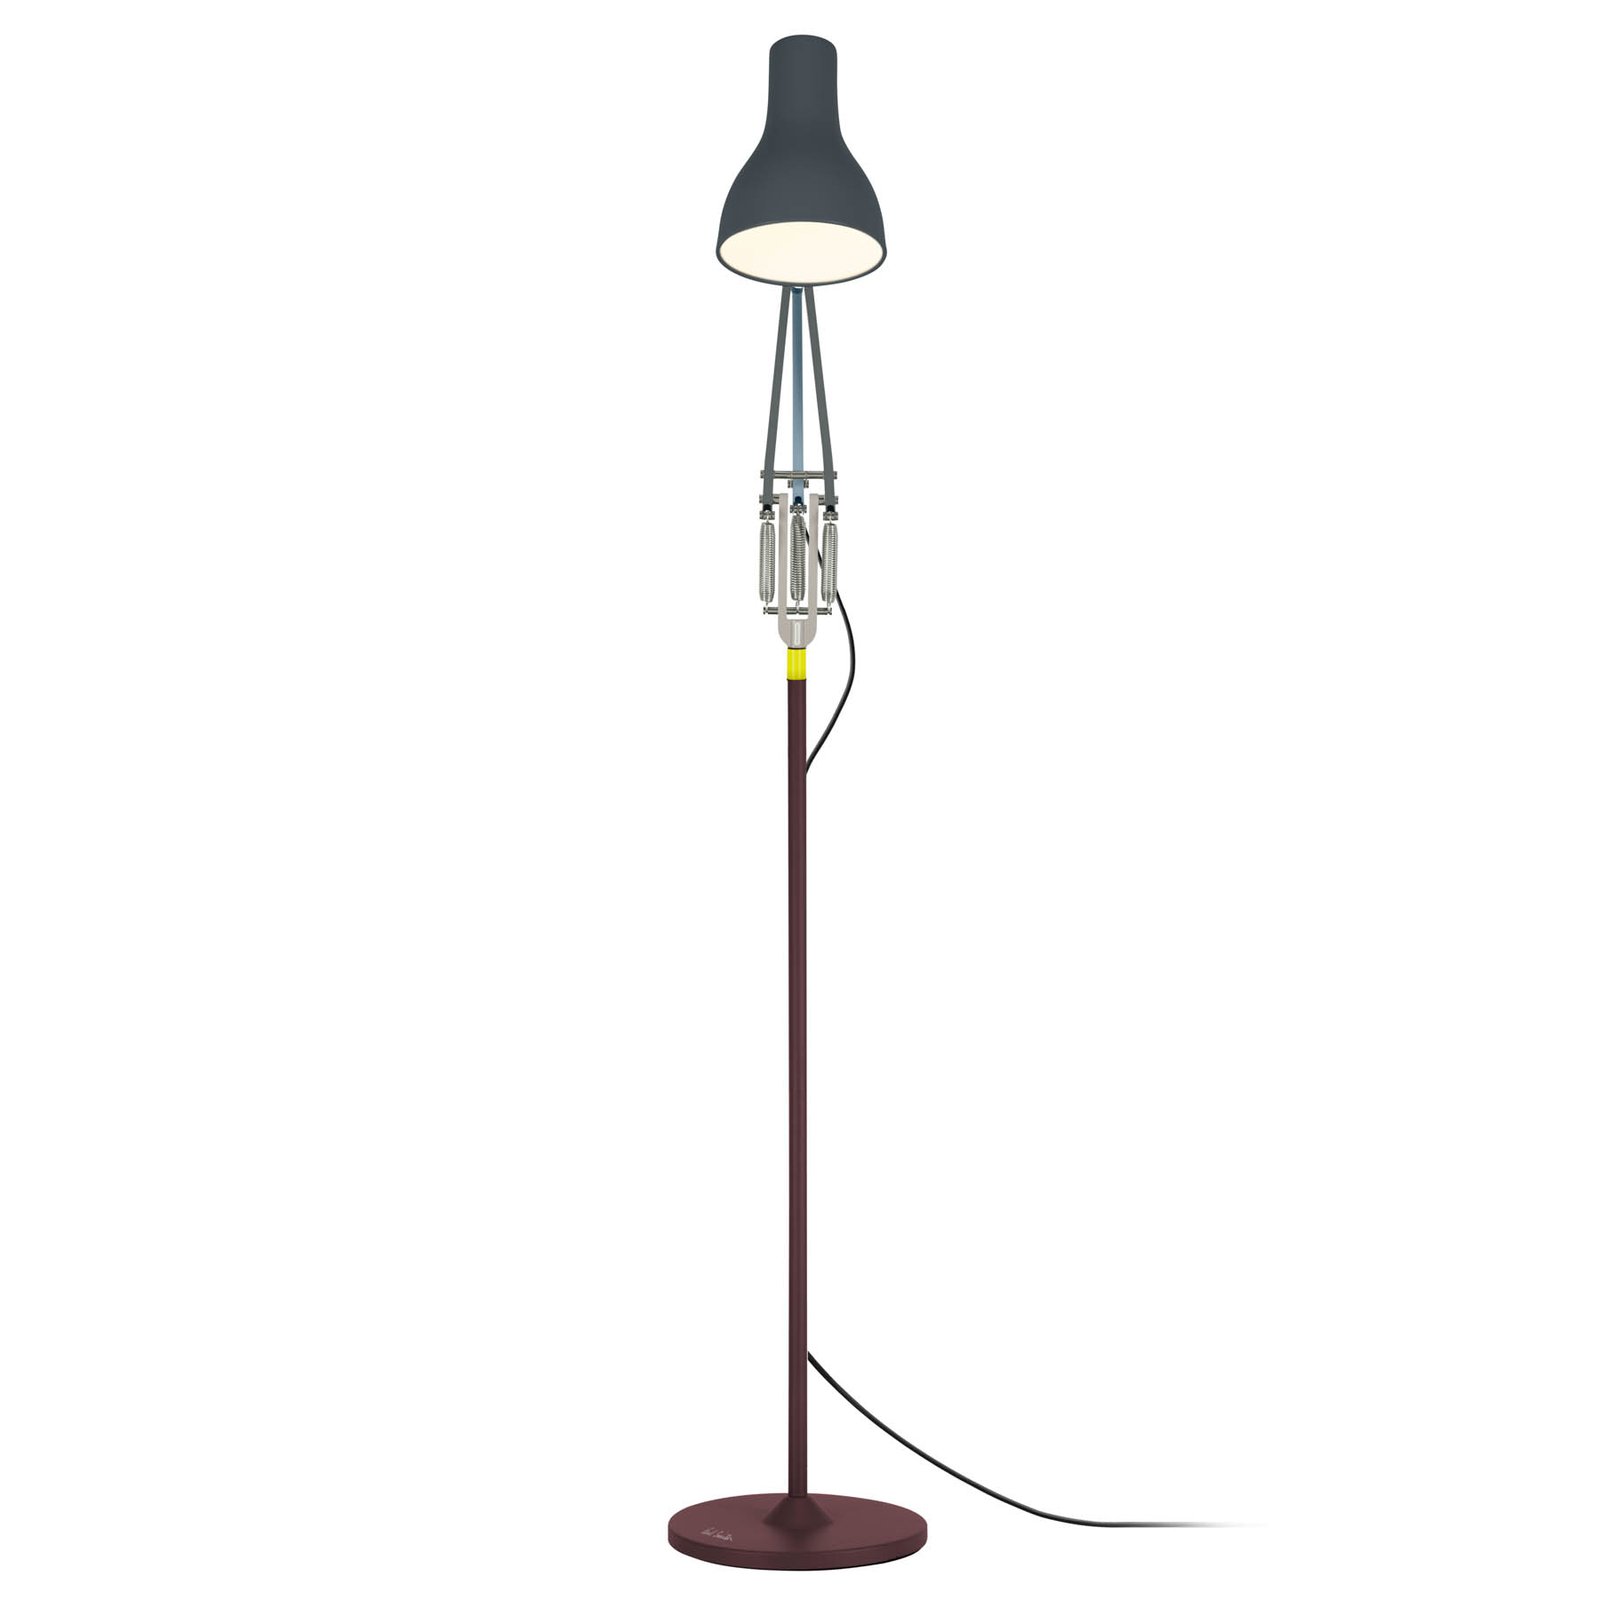 Anglepoise Type 75 lampadaire Paul Smith Edition 4